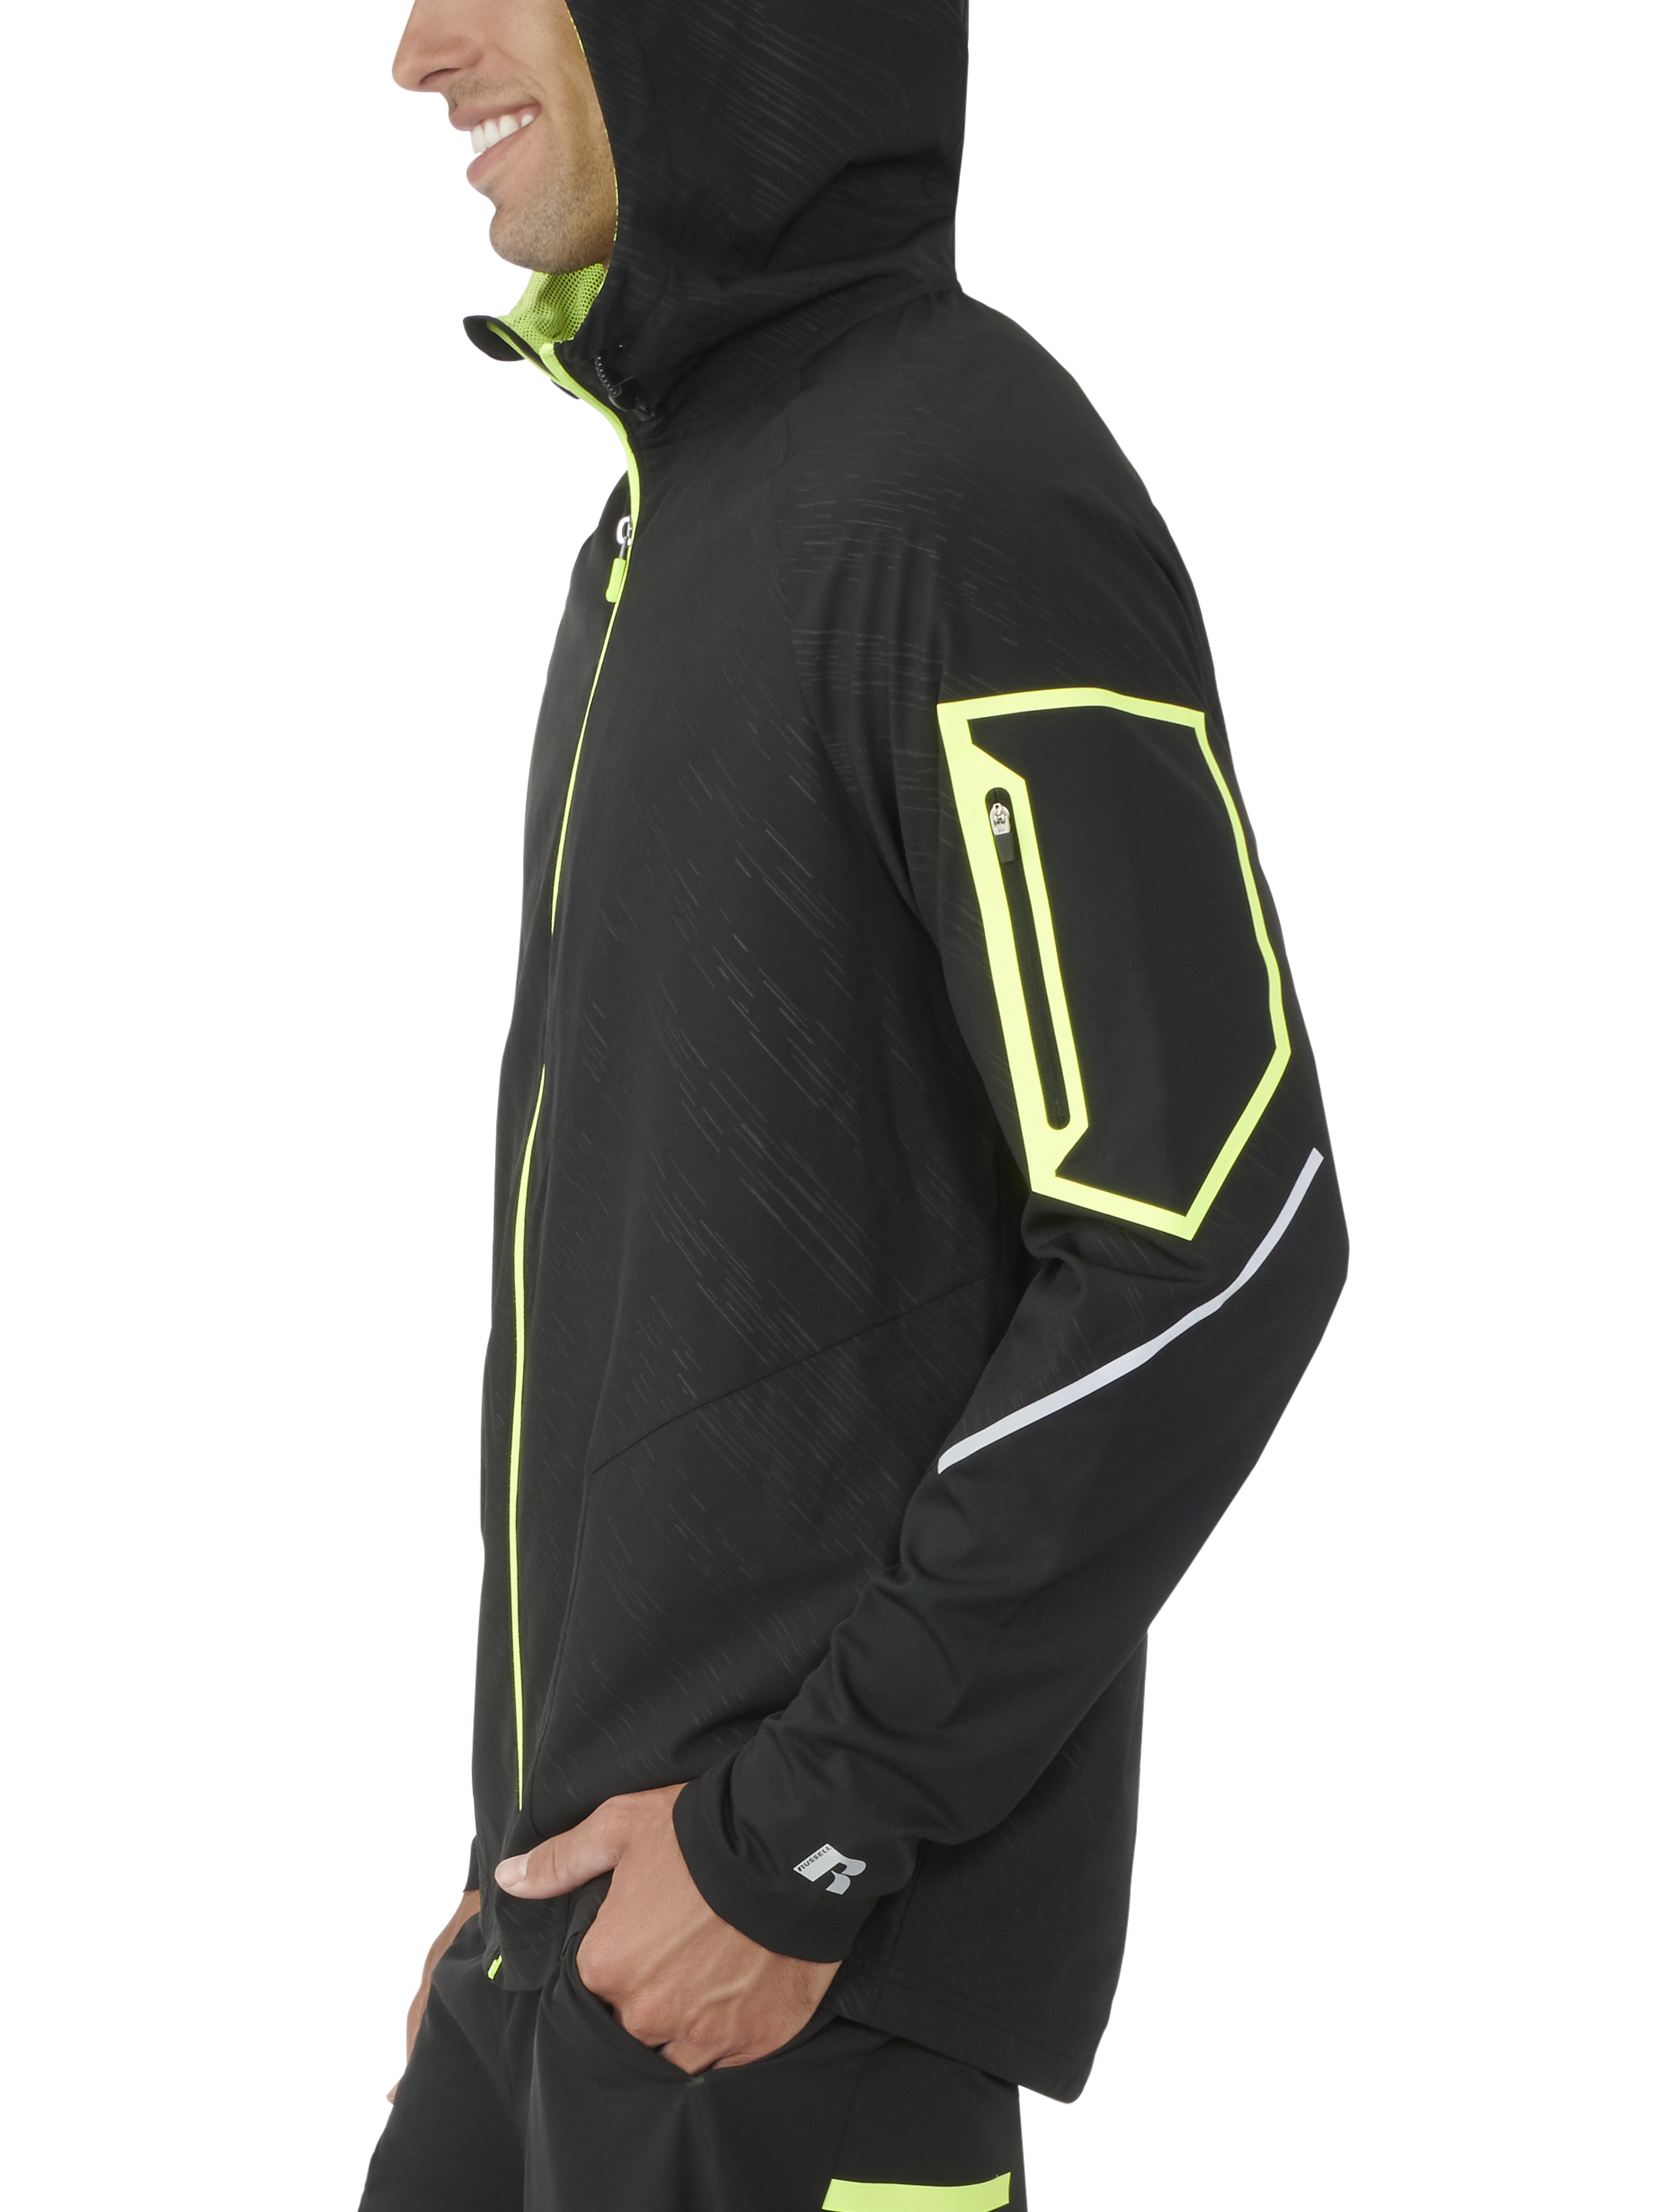 Russell Exclusive Men's Core Performance Jacket - image 2 of 7